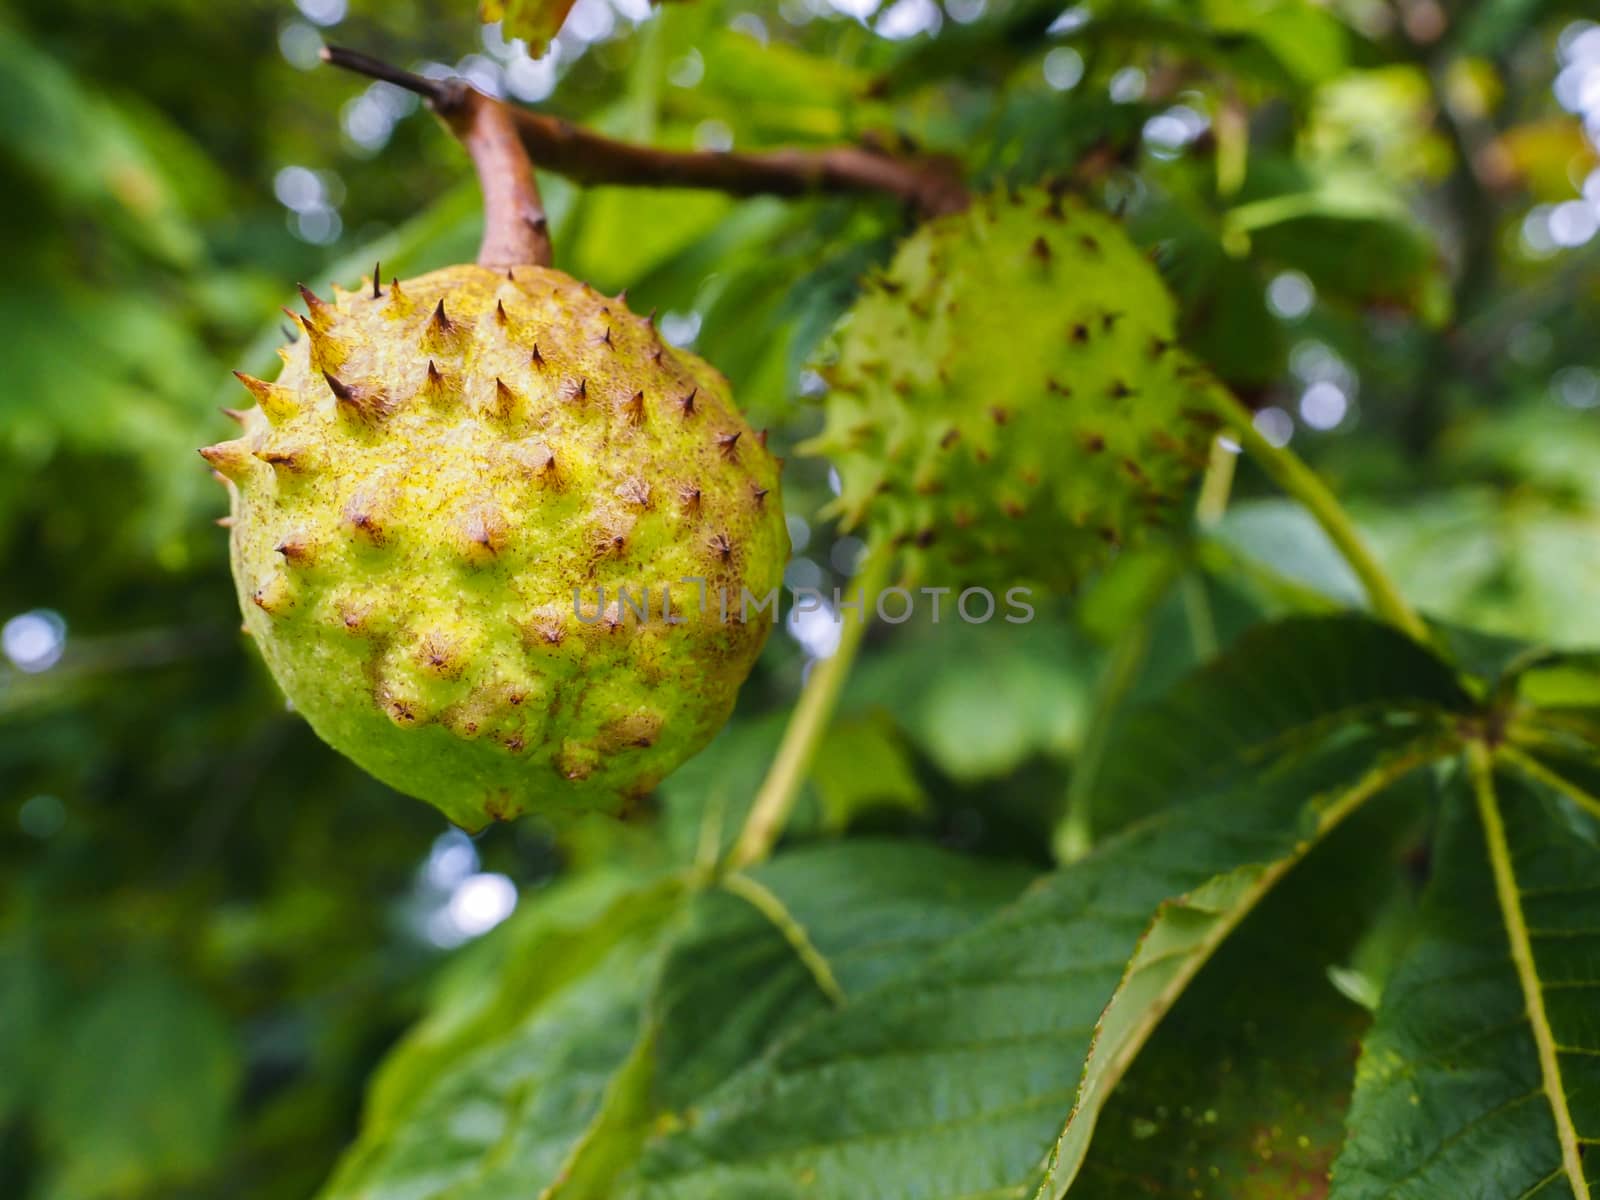 Closeup of unripe chestnut maturing on tree with fresh green leaves in background